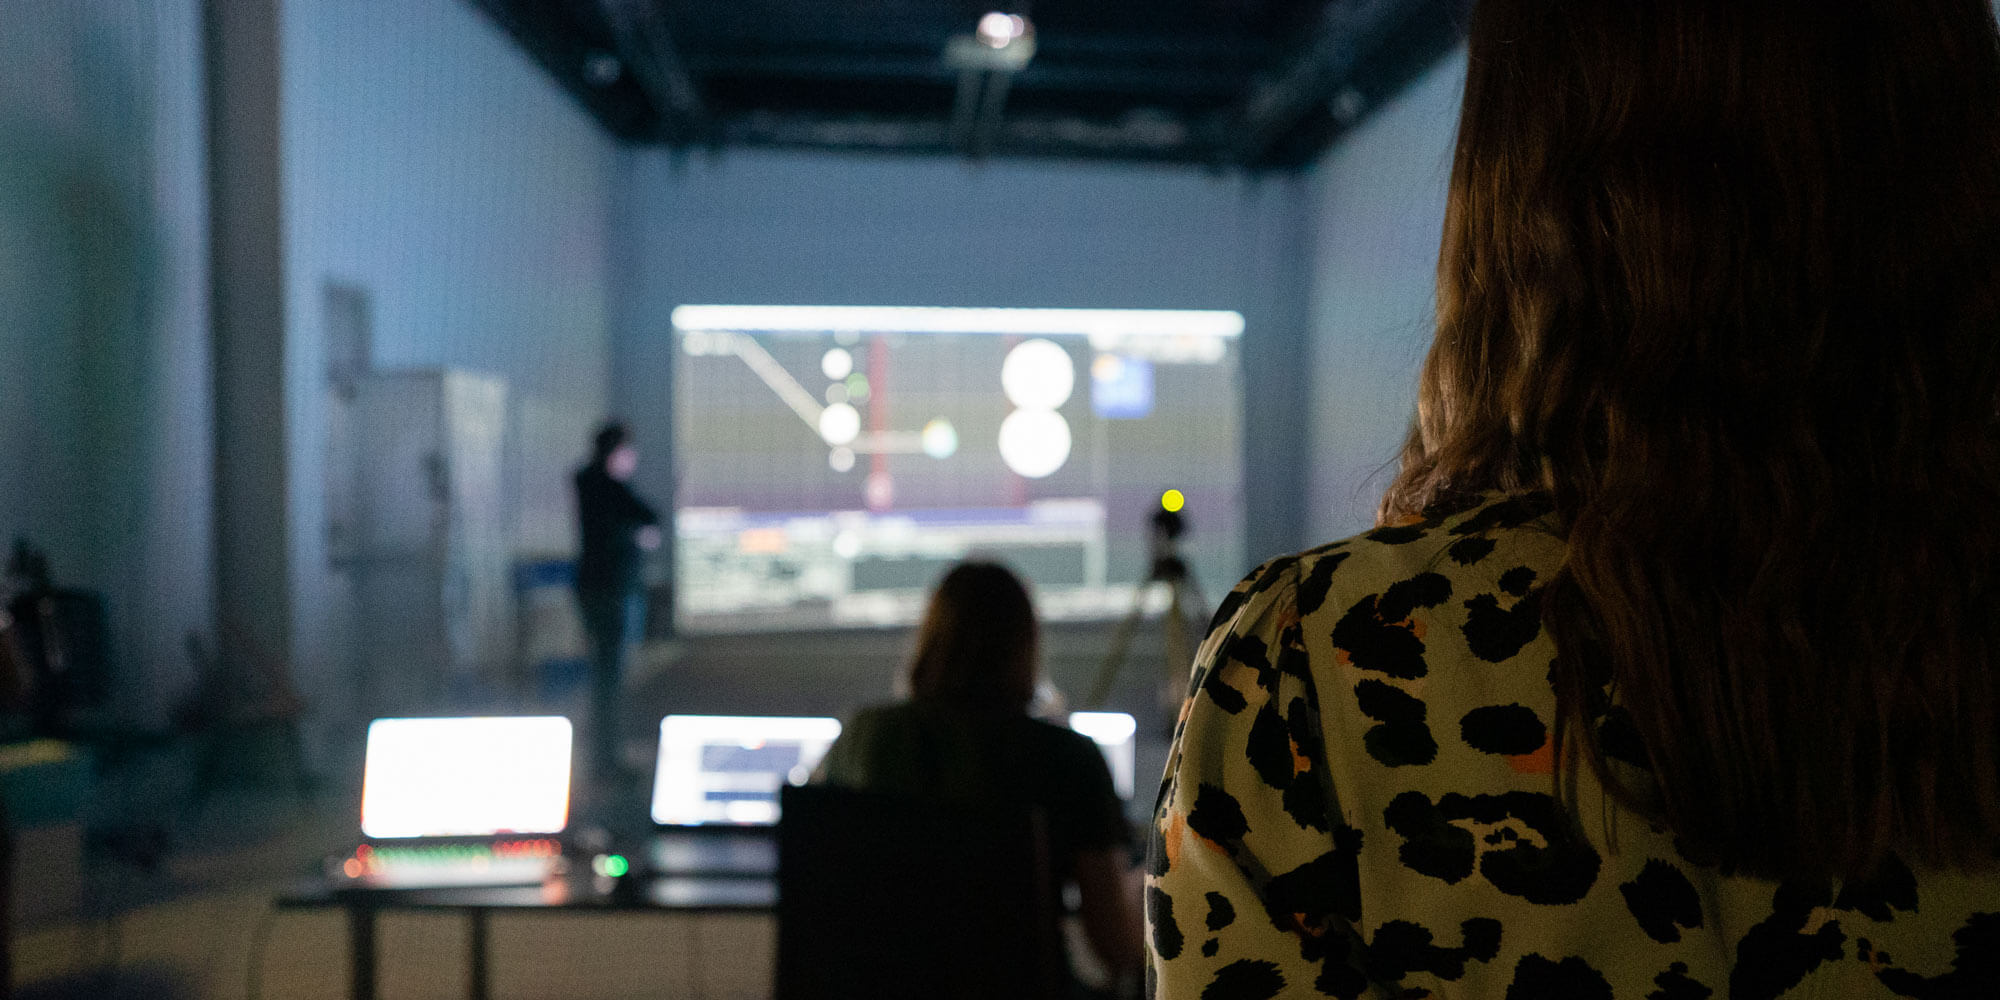 Drones merging to a digital canvas or painting with light: A workshop conducted by the Ars Electronica Futurelab as part of the Gigabit Academy demonstrated the art of swarm robotics.